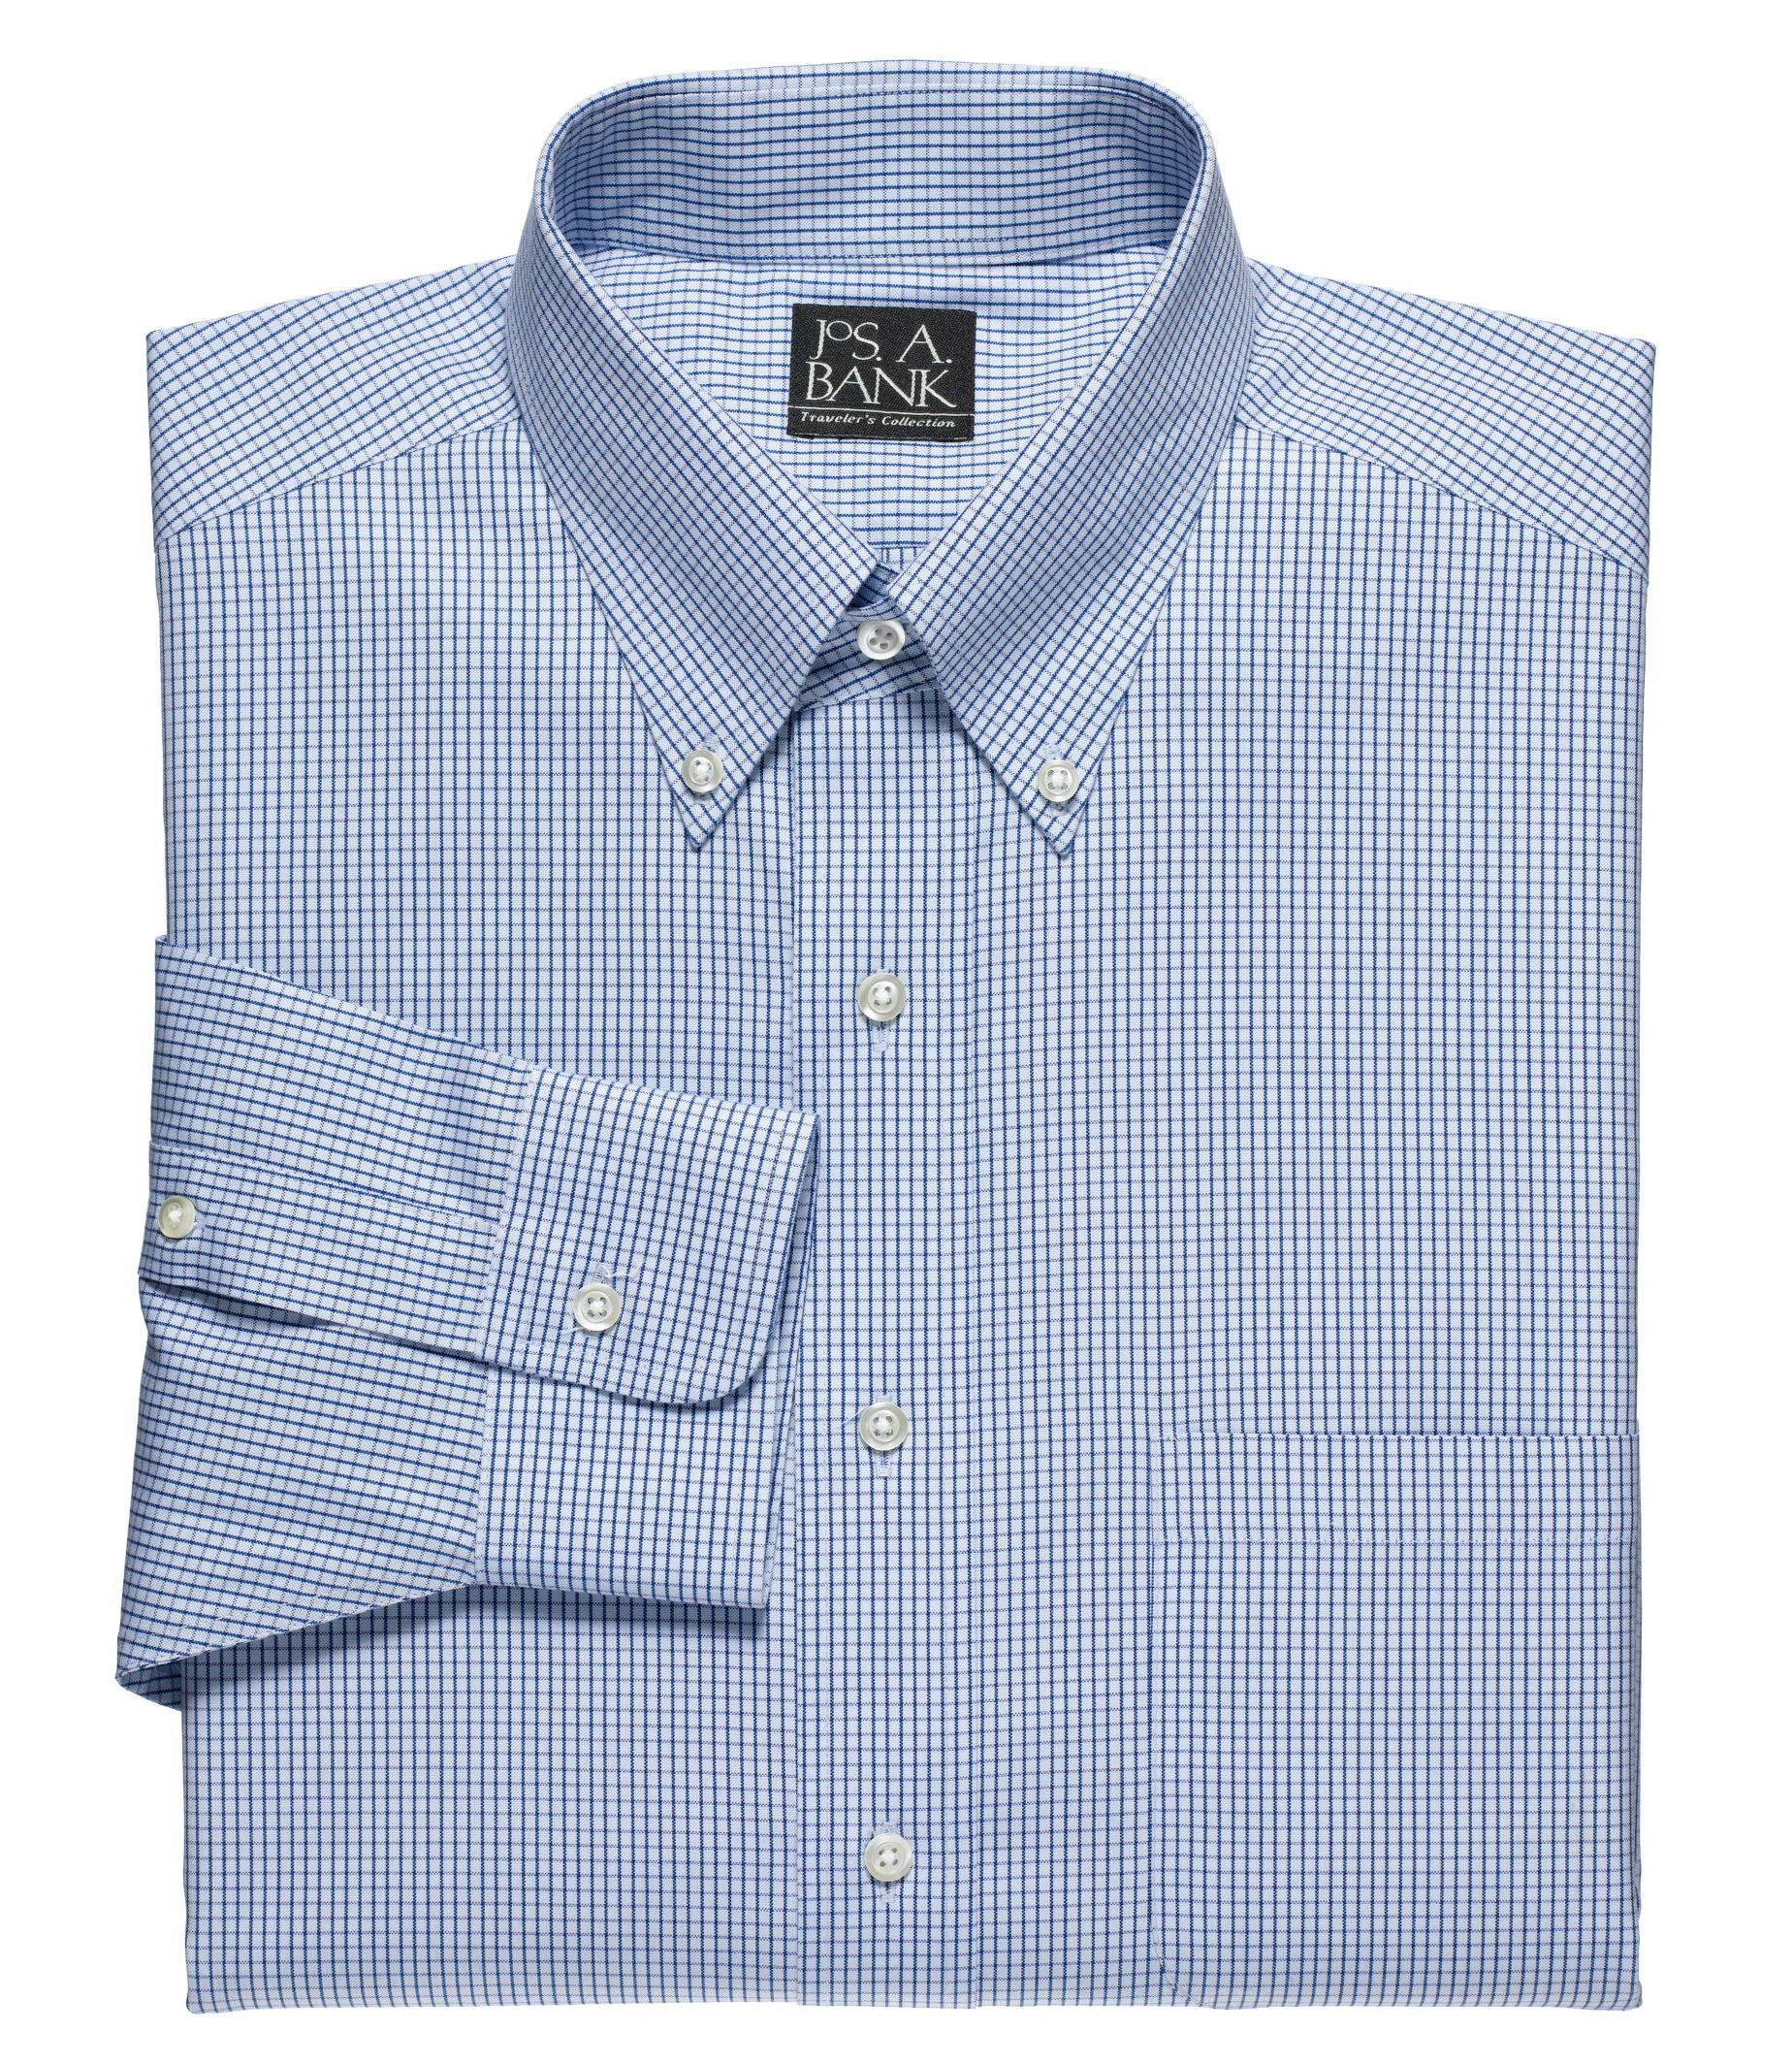 Lyst - Jos. A. Bank Traveler Collection Traditional Fit Button-down ...